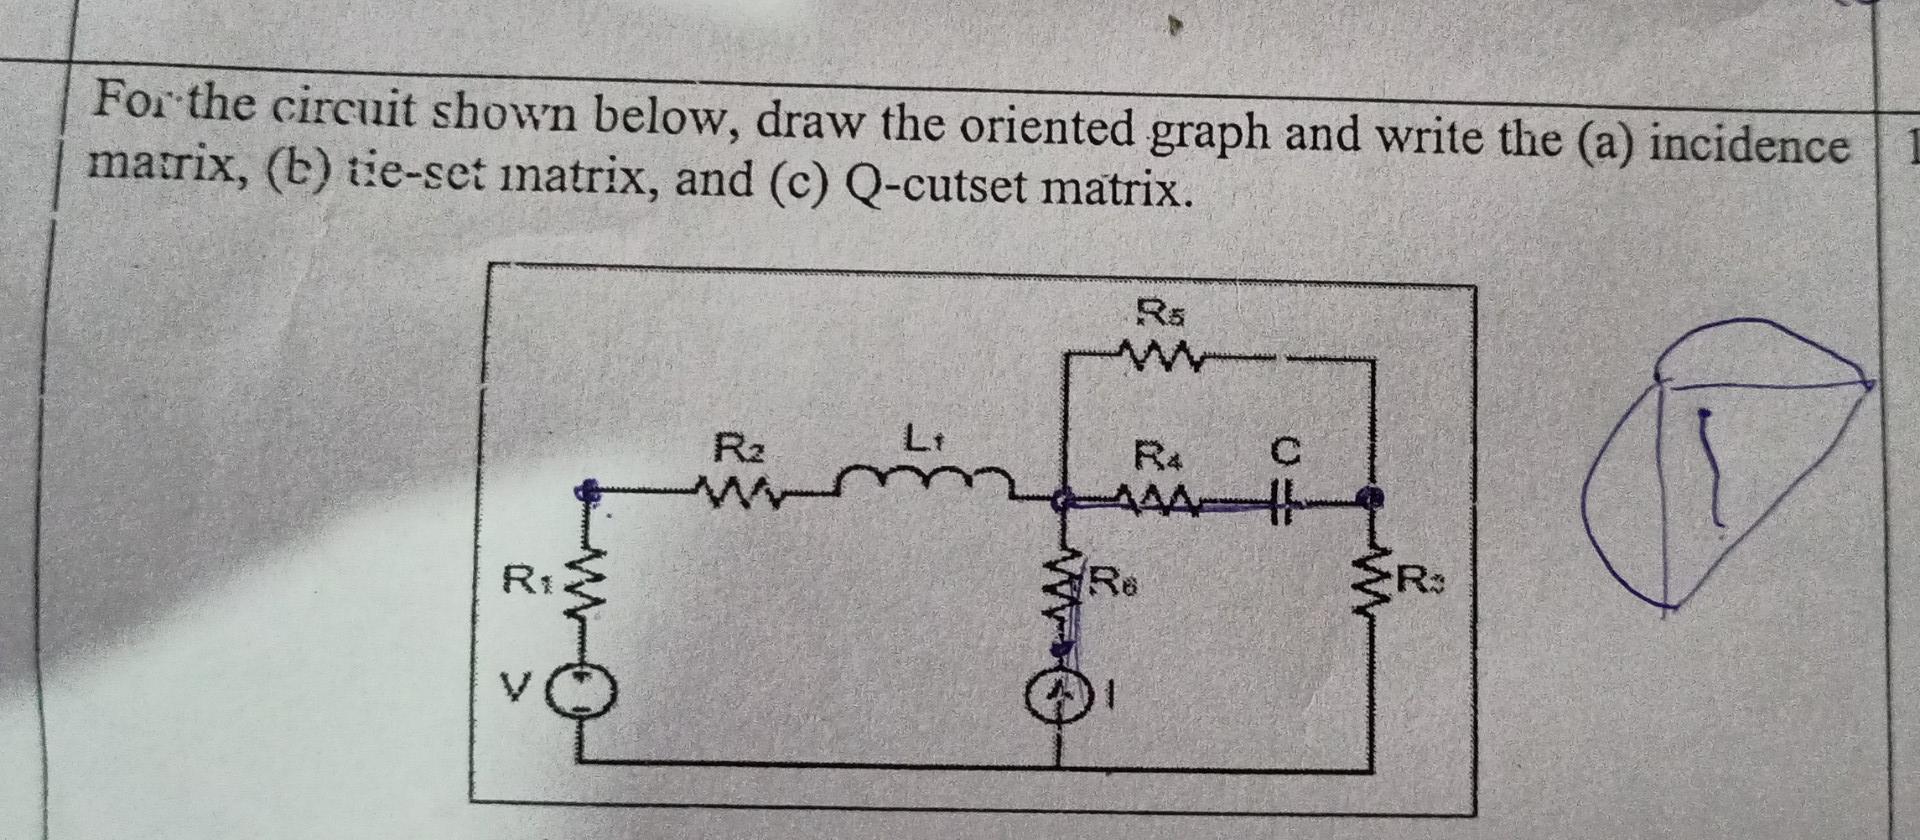 For the circuit shown below, draw the oriented graph and write the (a) incidence matrix, (b) tie-set matrix,